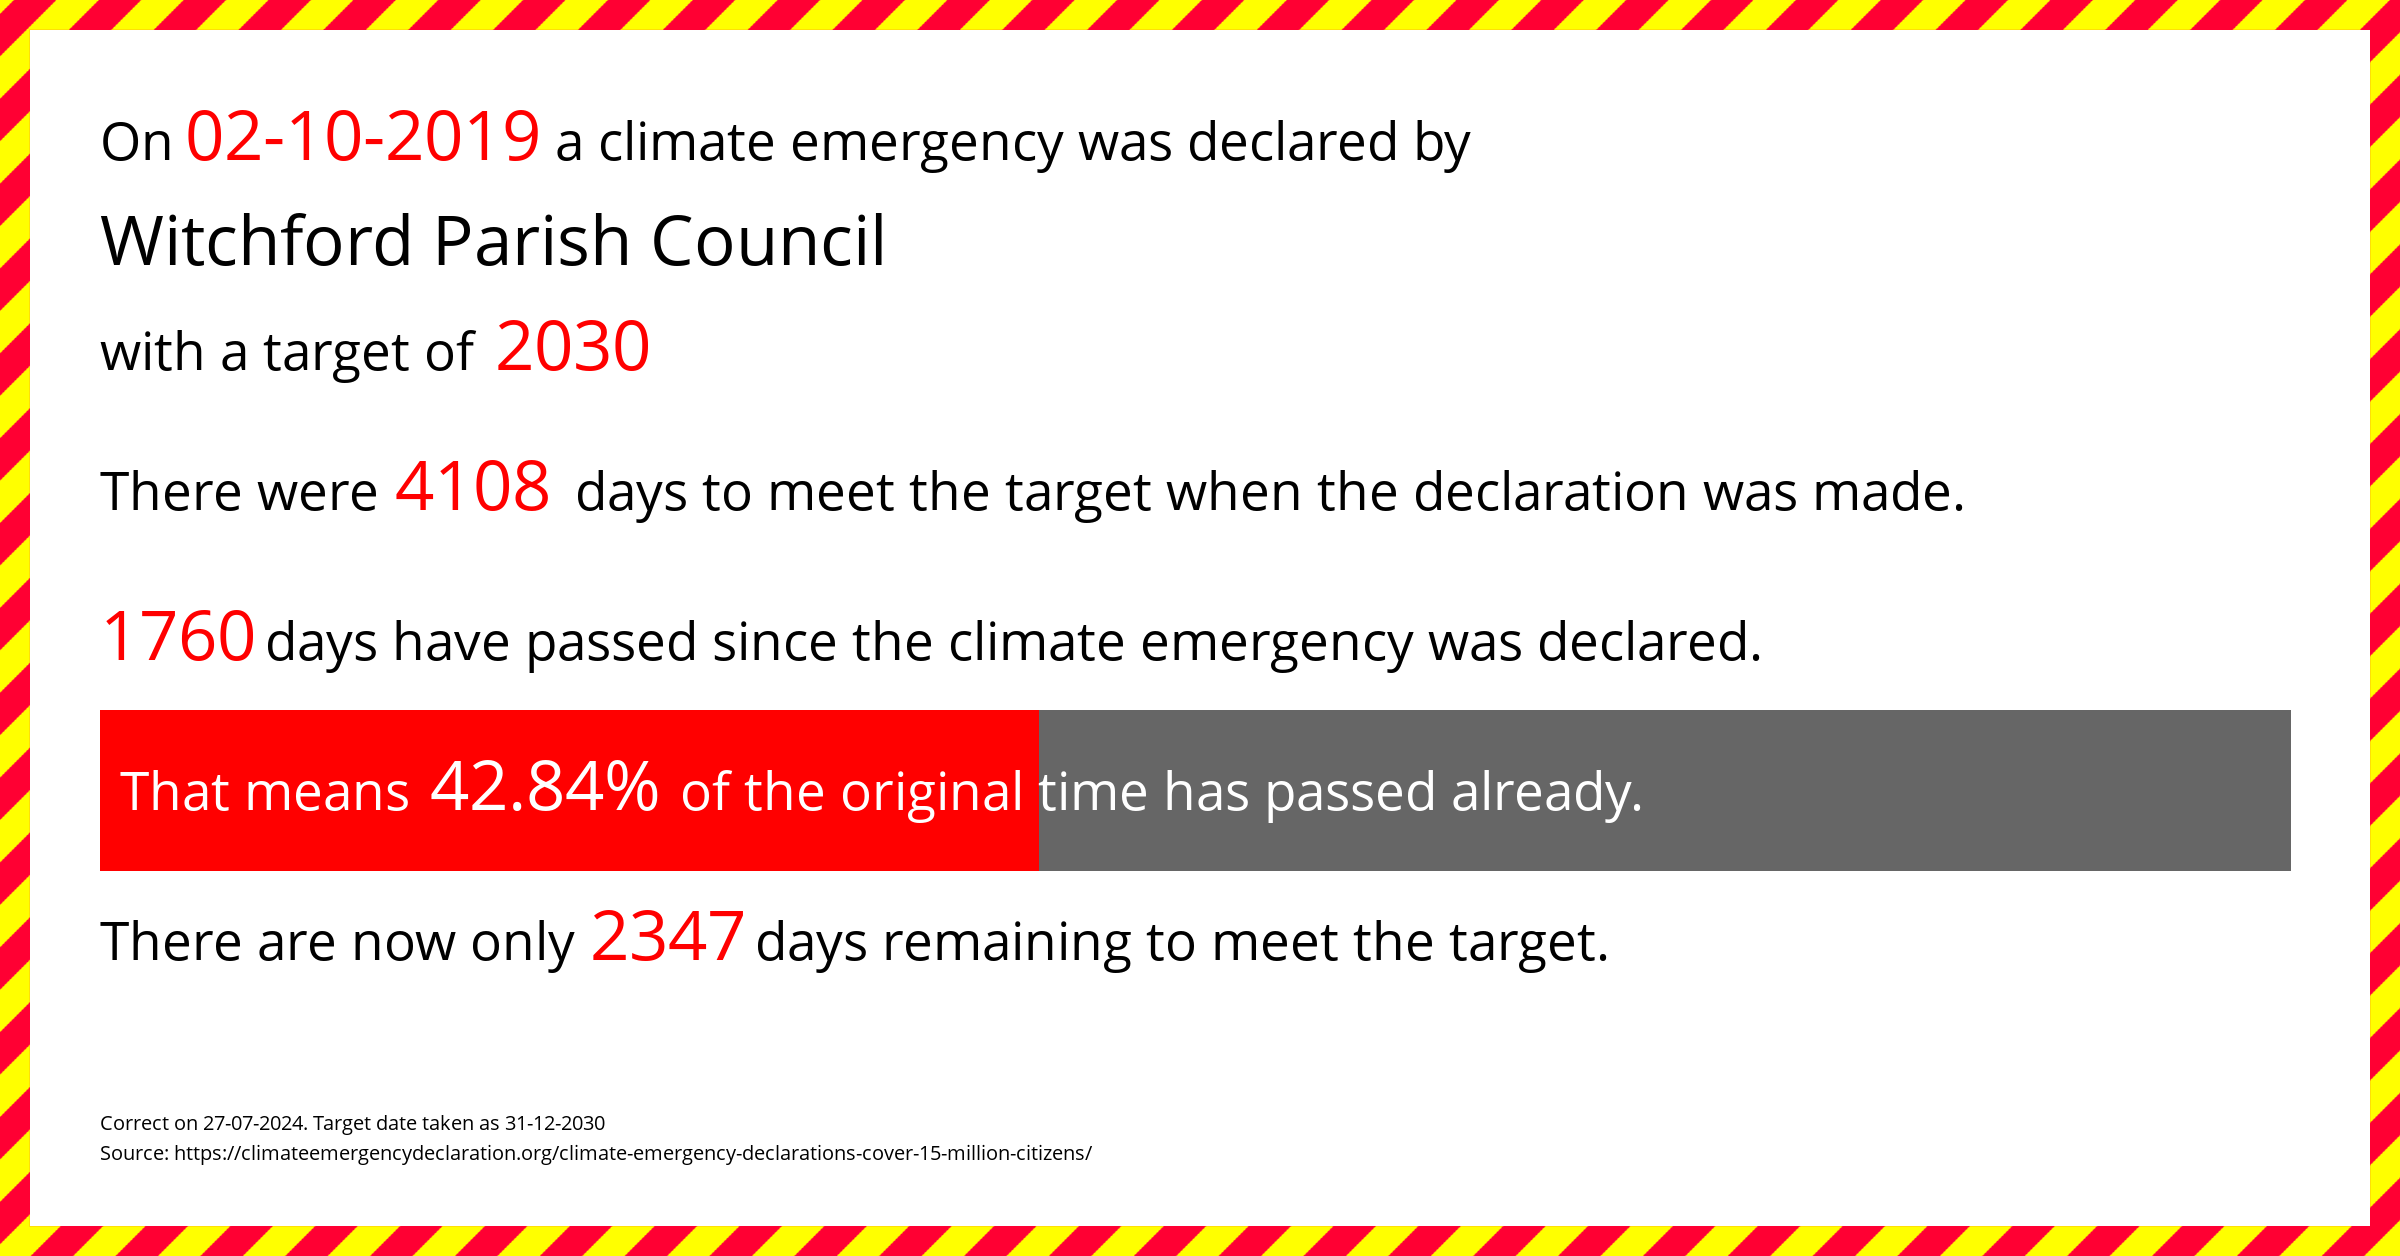 Witchford Parish Council  declared a Climate emergency on Wednesday 2nd October 2019, with a target of 2030.